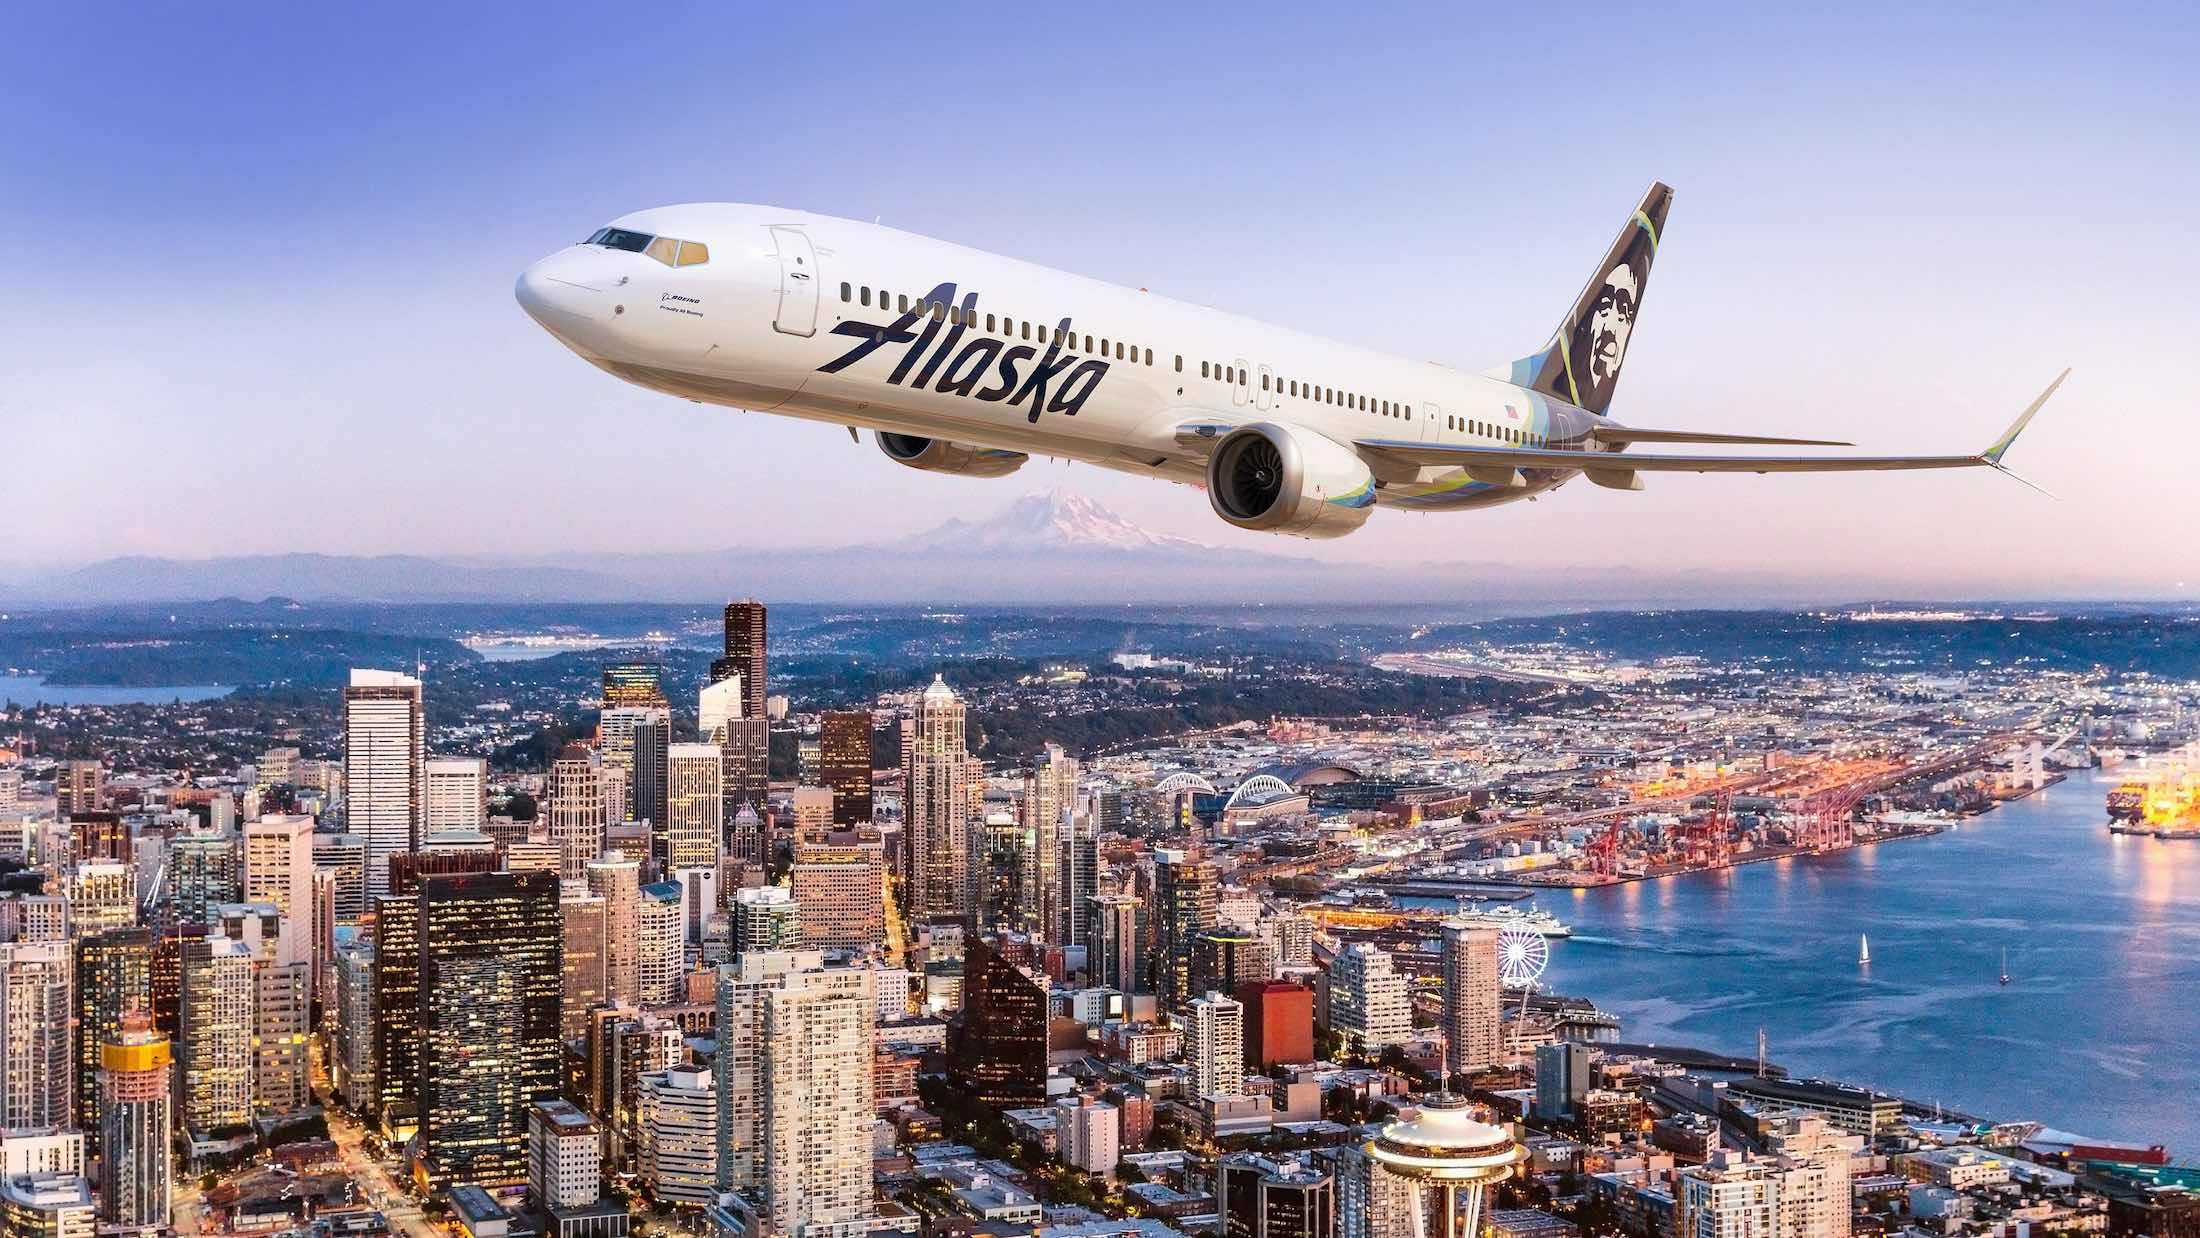 Alaska Airlines Adding Longest Route Yet...On A 737 - Live and Let's Fly